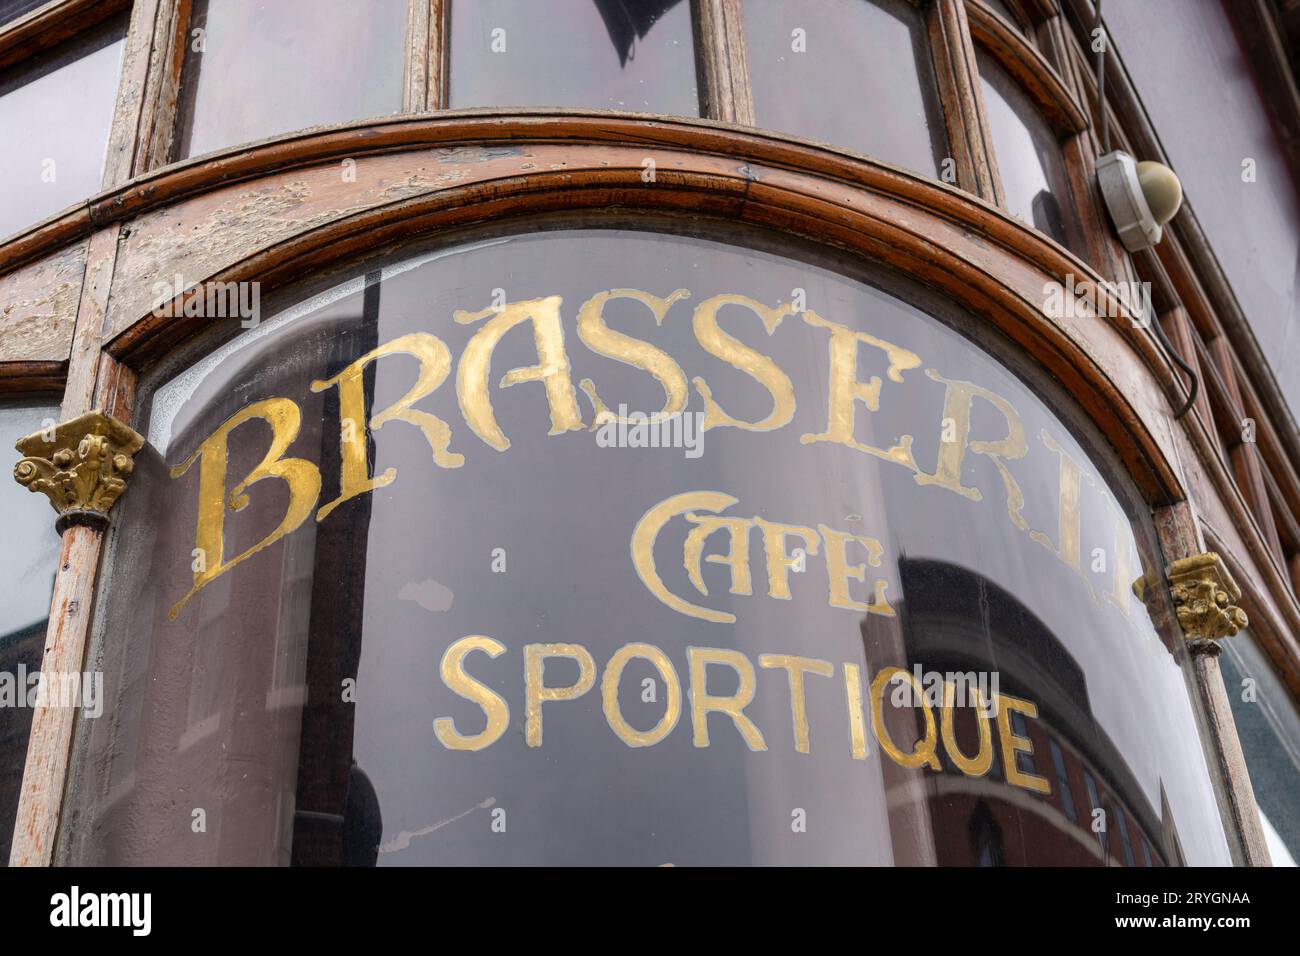 Vintage sign reading, Brasserie Cafe Sportique on a disused building in Middlesbrough, UK. Stock Photo